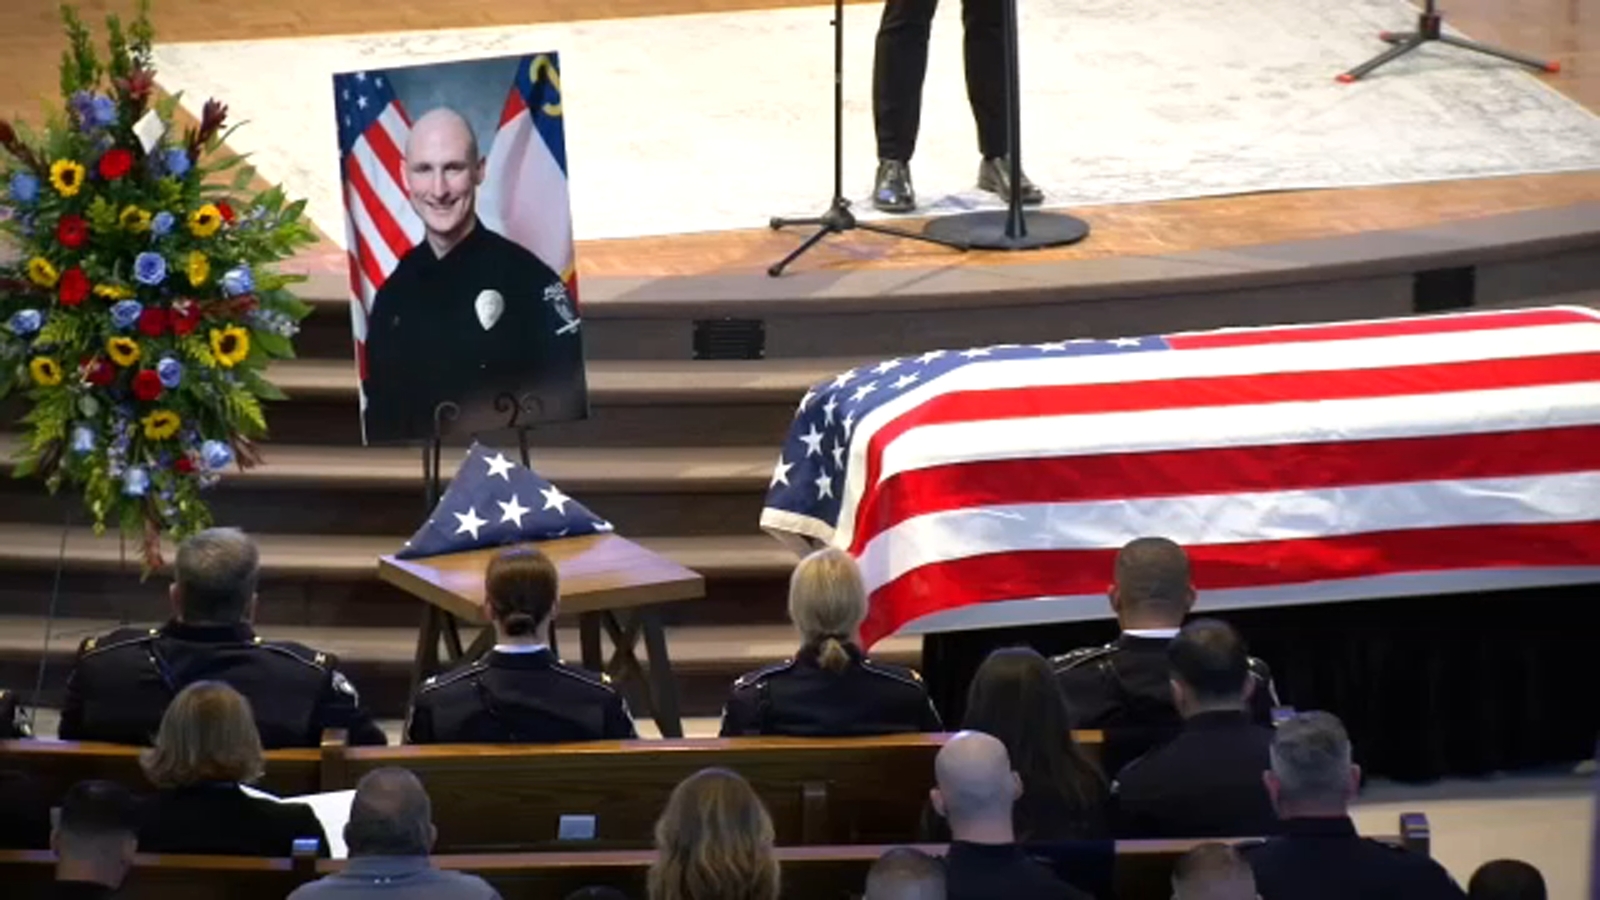 Fallen Officer Joshua Eyer | Funeral for police officer killed in North Carolina while serving warrant in Charlotte [Video]